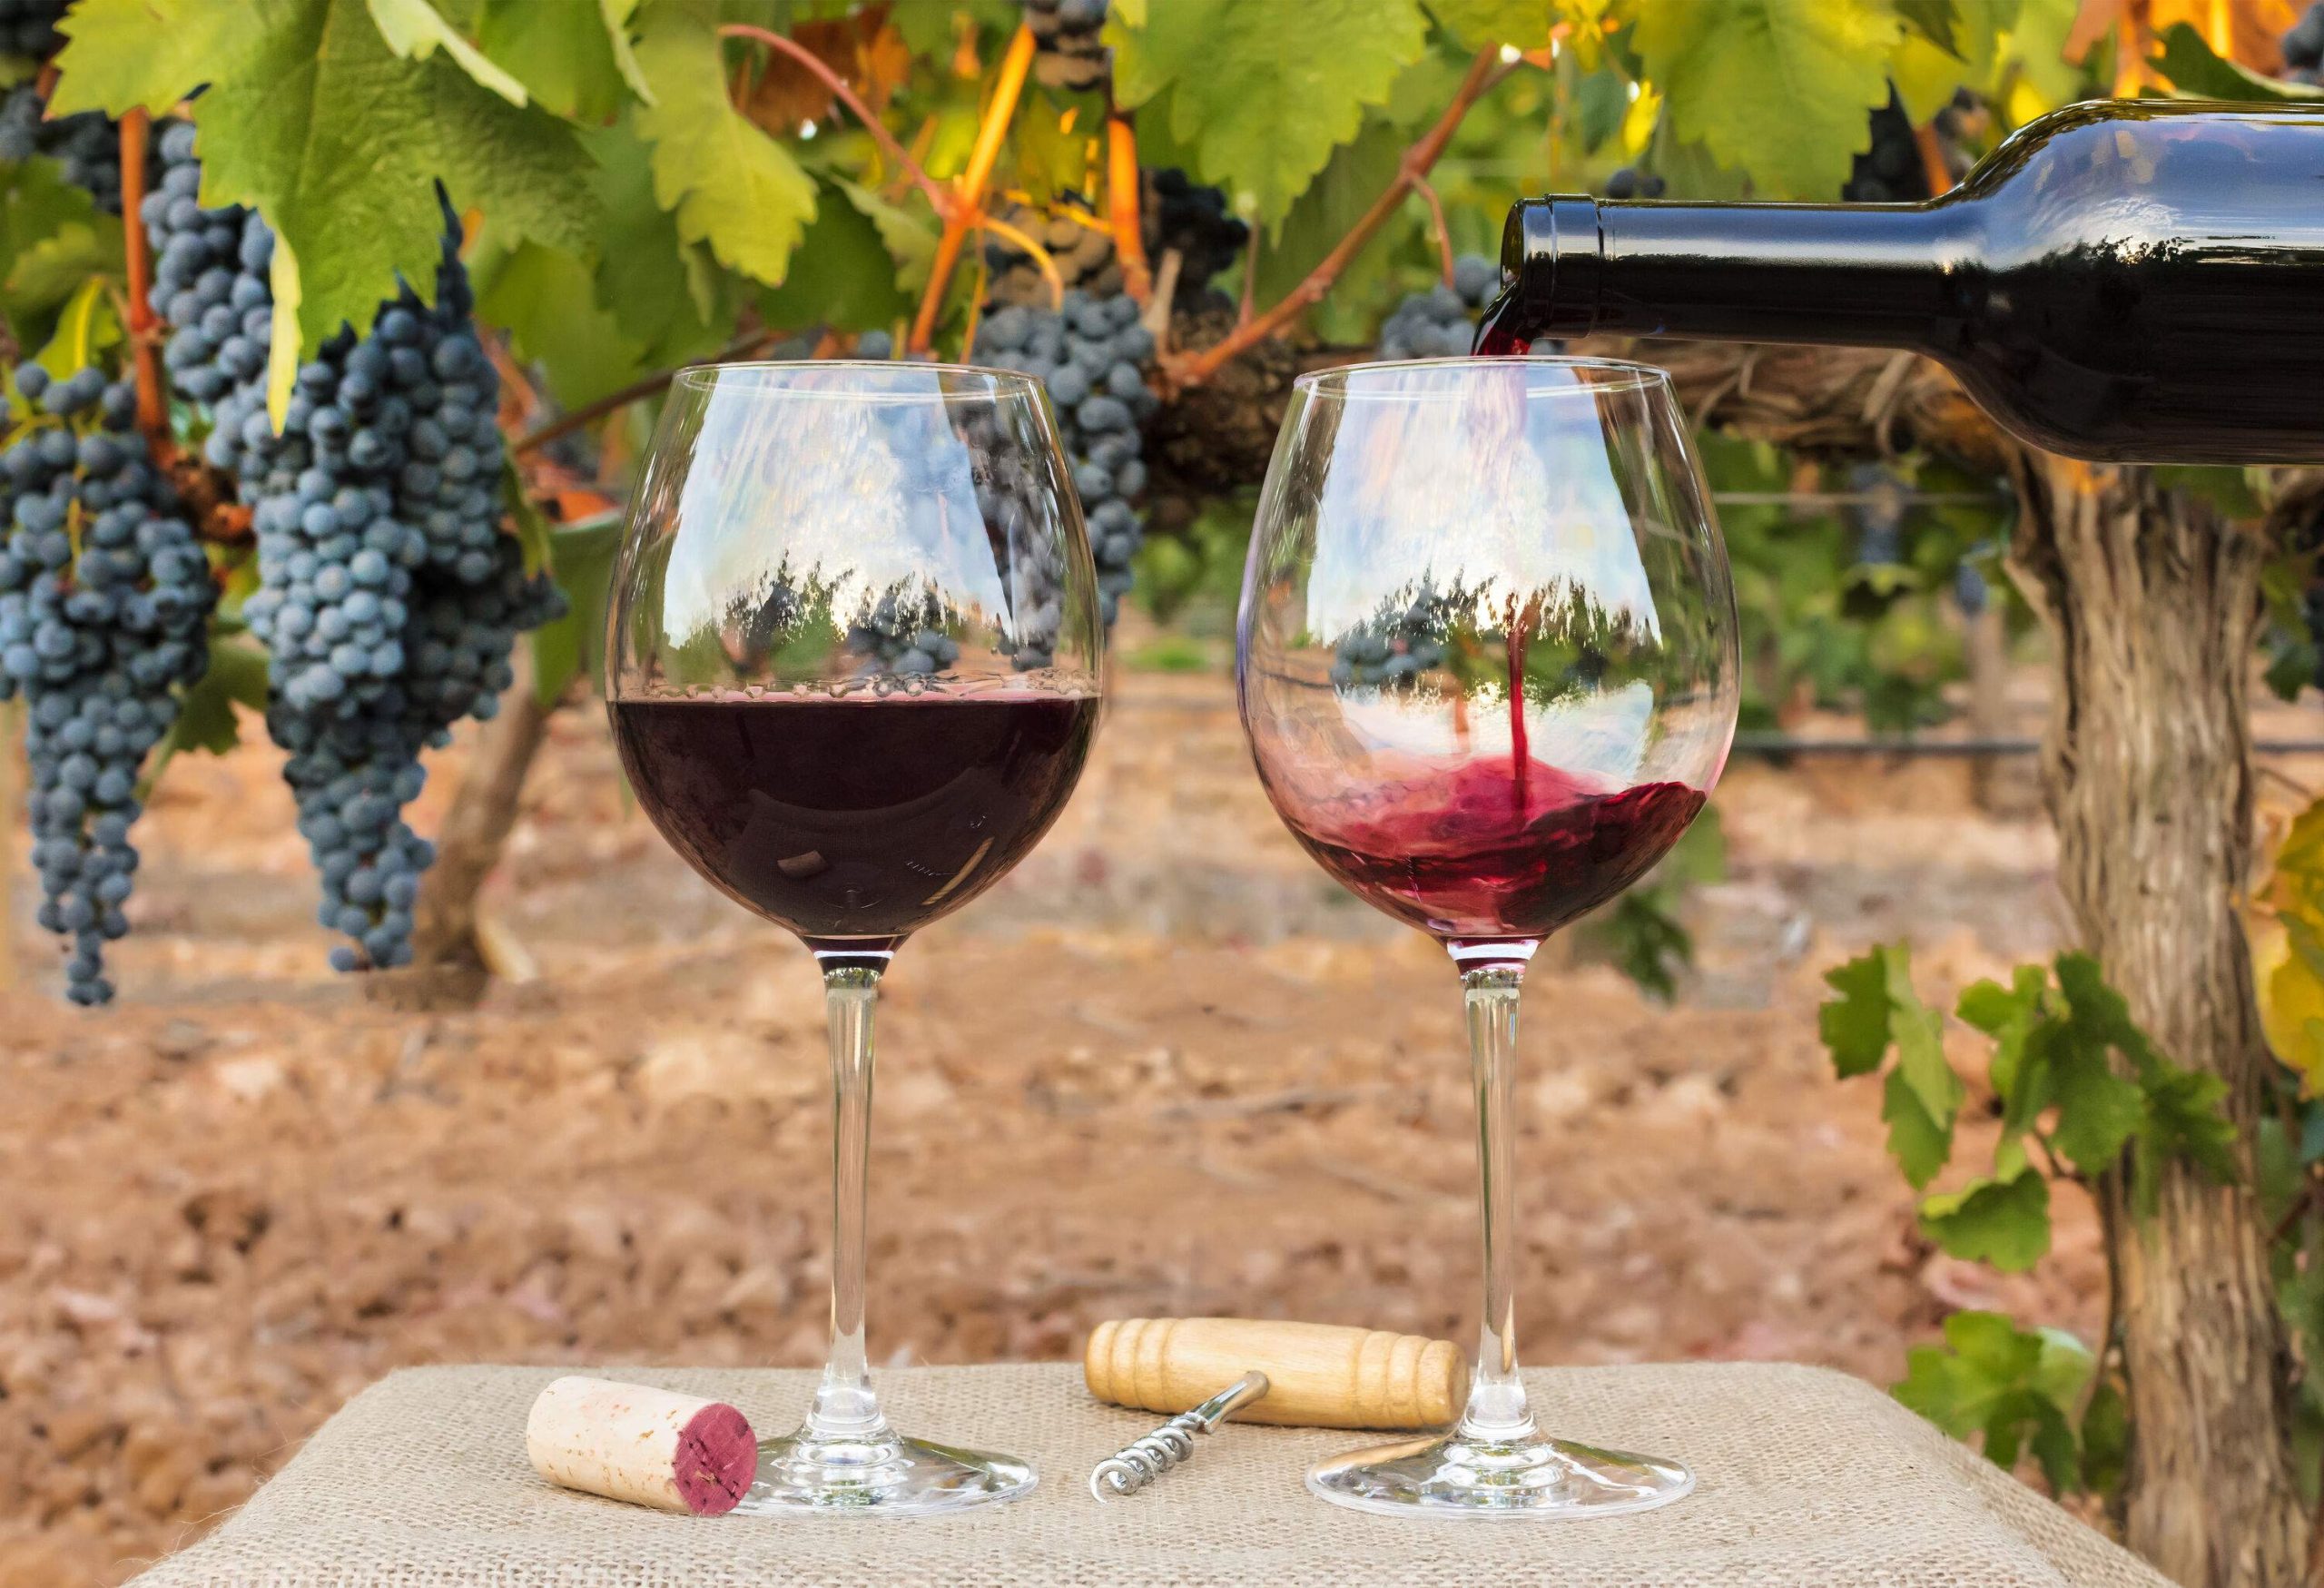 Red wine on a bottle is poured into the second glass with the background of hanging branches of grapes.